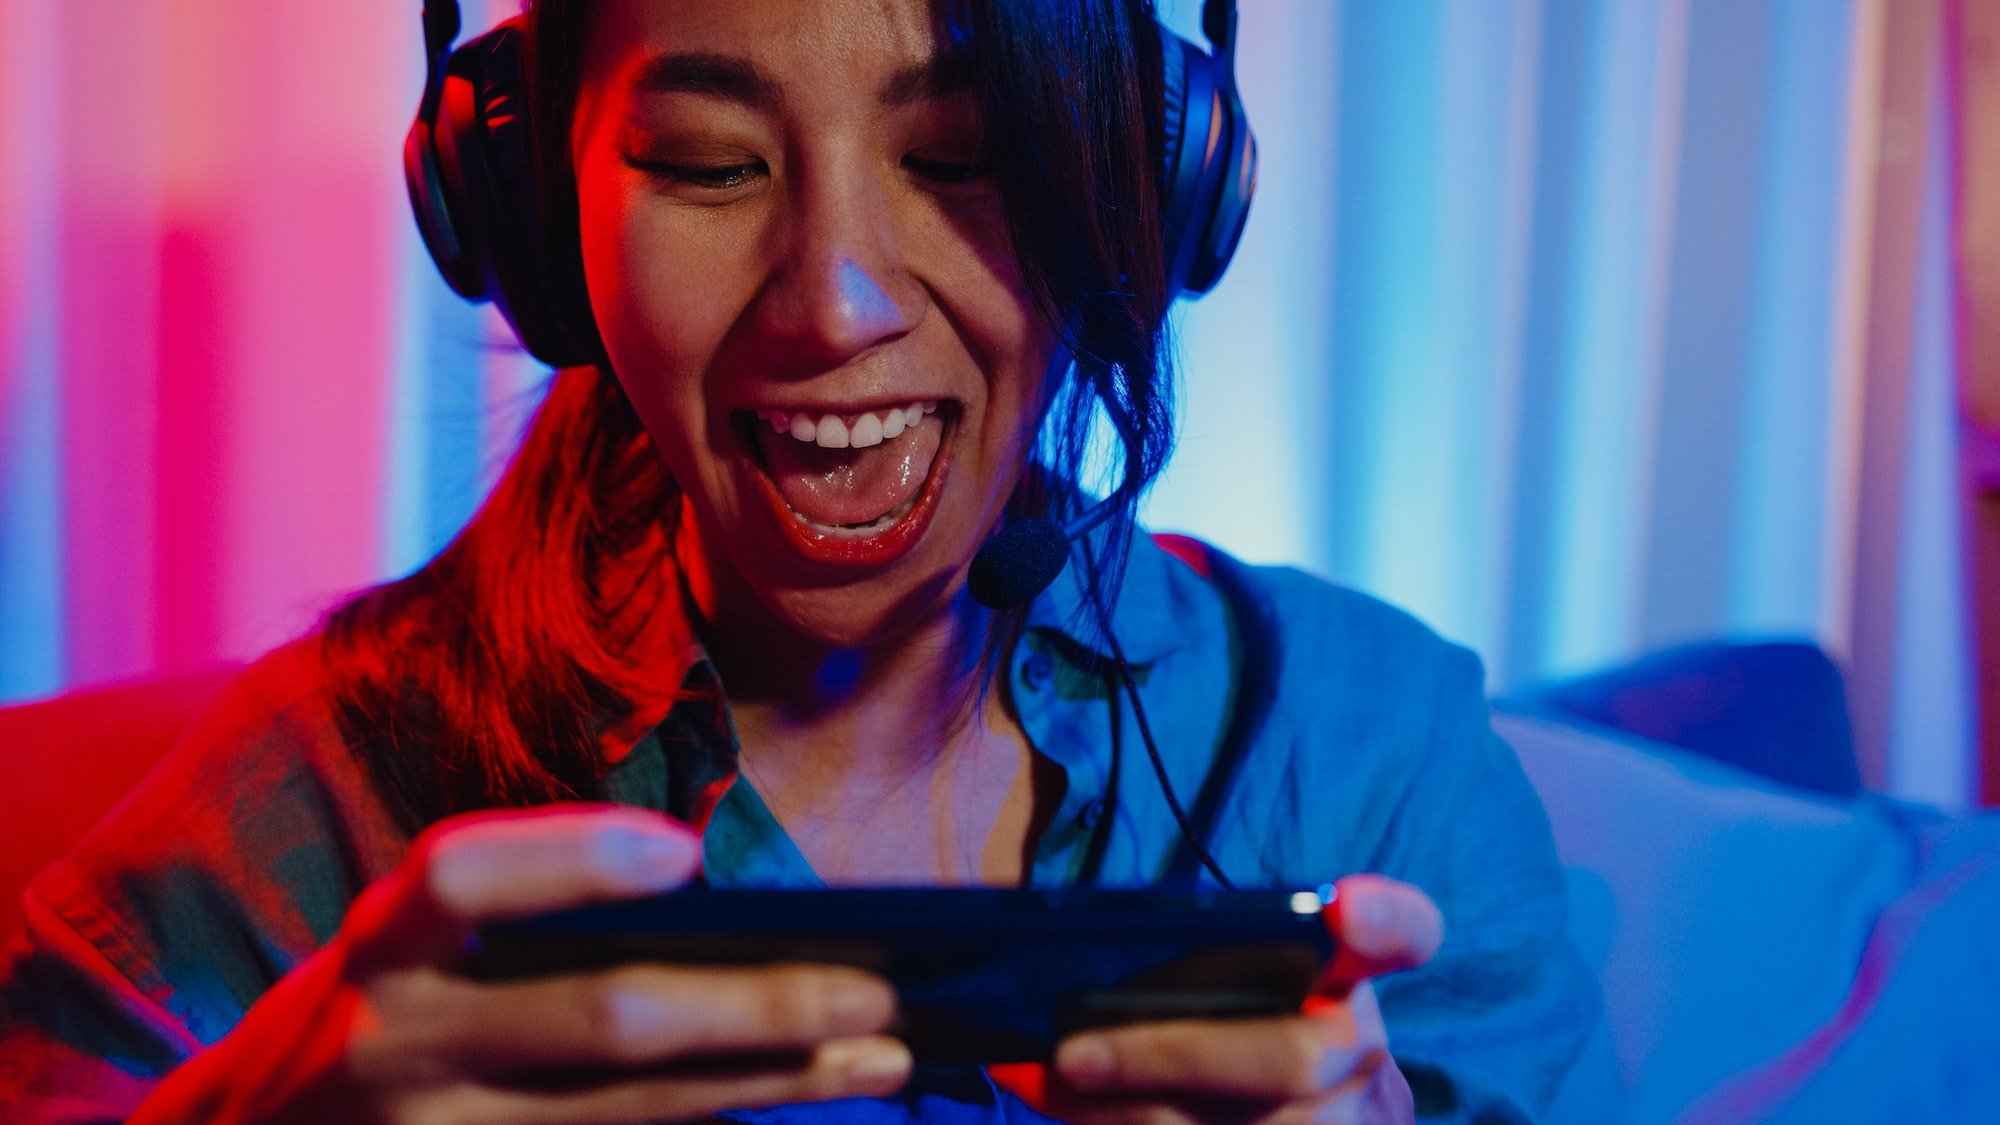 asia girl gamer wear headphone competition video game online with smartphone.